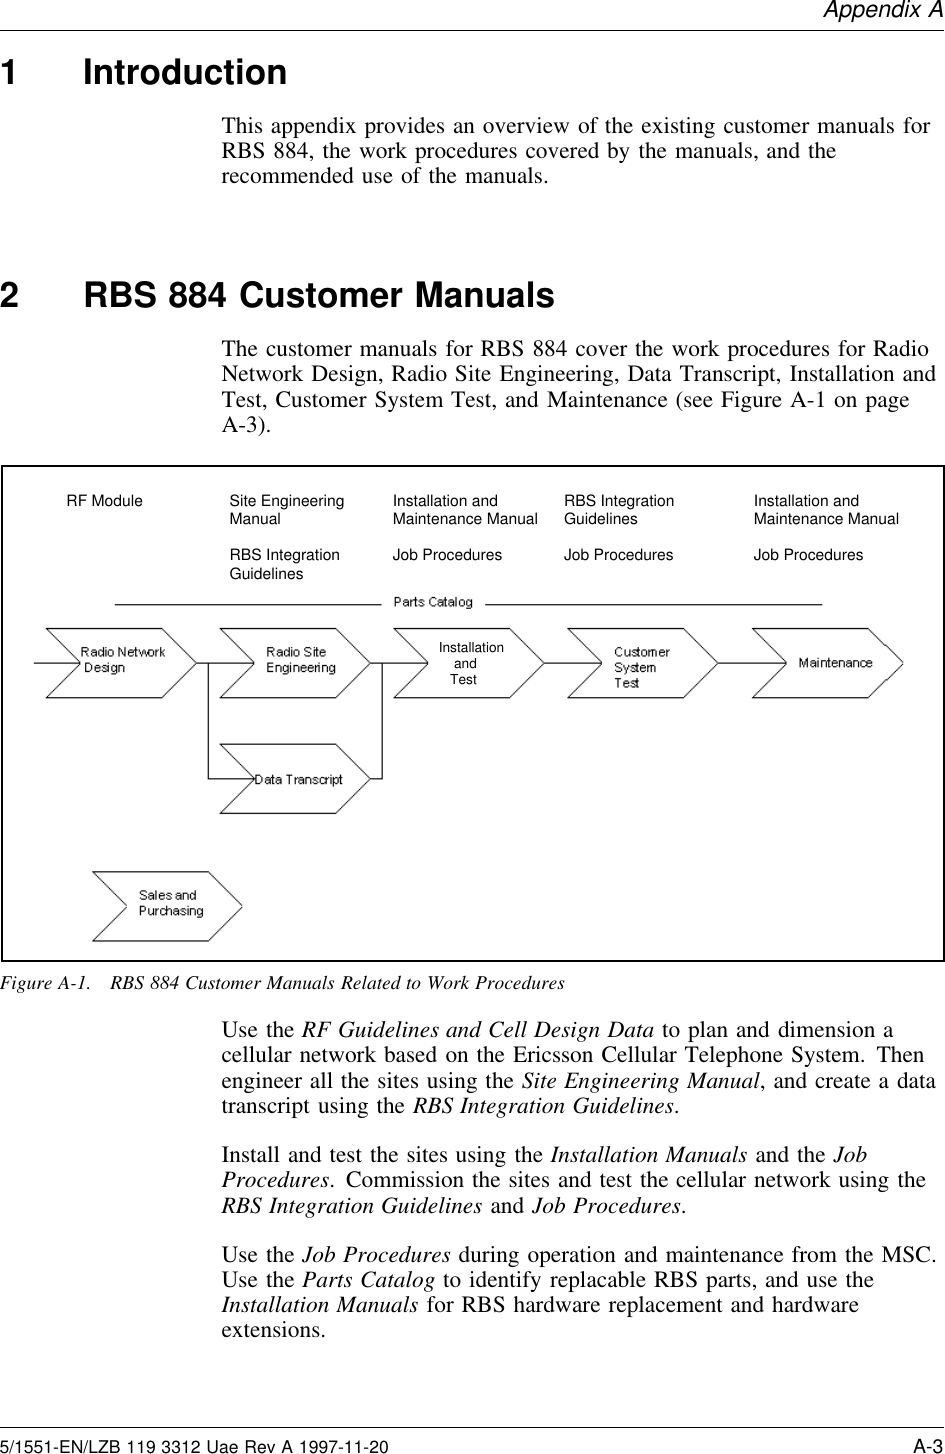 Appendix A1 IntroductionThis appendix provides an overview of the existing customer manuals forRBS 884, the work procedures covered by the manuals, and therecommended use of the manuals.2 RBS 884 Customer ManualsThe customer manuals for RBS 884 cover the work procedures for RadioNetwork Design, Radio Site Engineering, Data Transcript, Installation andTest, Customer System Test, and Maintenance (see Figure A-1 on pageA-3).RF Module Site EngineeringManualRBS IntegrationGuidelinesInstallation andMaintenance ManualJob ProceduresRBS IntegrationGuidelinesJob ProceduresInstallation andMaintenance ManualJob ProceduresInstallation    and   TestFigure A-1. RBS 884 Customer Manuals Related to Work ProceduresUse the RF Guidelines and Cell Design Data to plan and dimension acellular network based on the Ericsson Cellular Telephone System. Thenengineer all the sites using the Site Engineering Manual, and create a datatranscript using the RBS Integration Guidelines.Install and test the sites using the Installation Manuals and the JobProcedures. Commission the sites and test the cellular network using theRBS Integration Guidelines and Job Procedures.Use the Job Procedures during operation and maintenance from the MSC.Use the Parts Catalog to identify replacable RBS parts, and use theInstallation Manuals for RBS hardware replacement and hardwareextensions.5/1551-EN/LZB 119 3312 Uae Rev A 1997-11-20 A-3